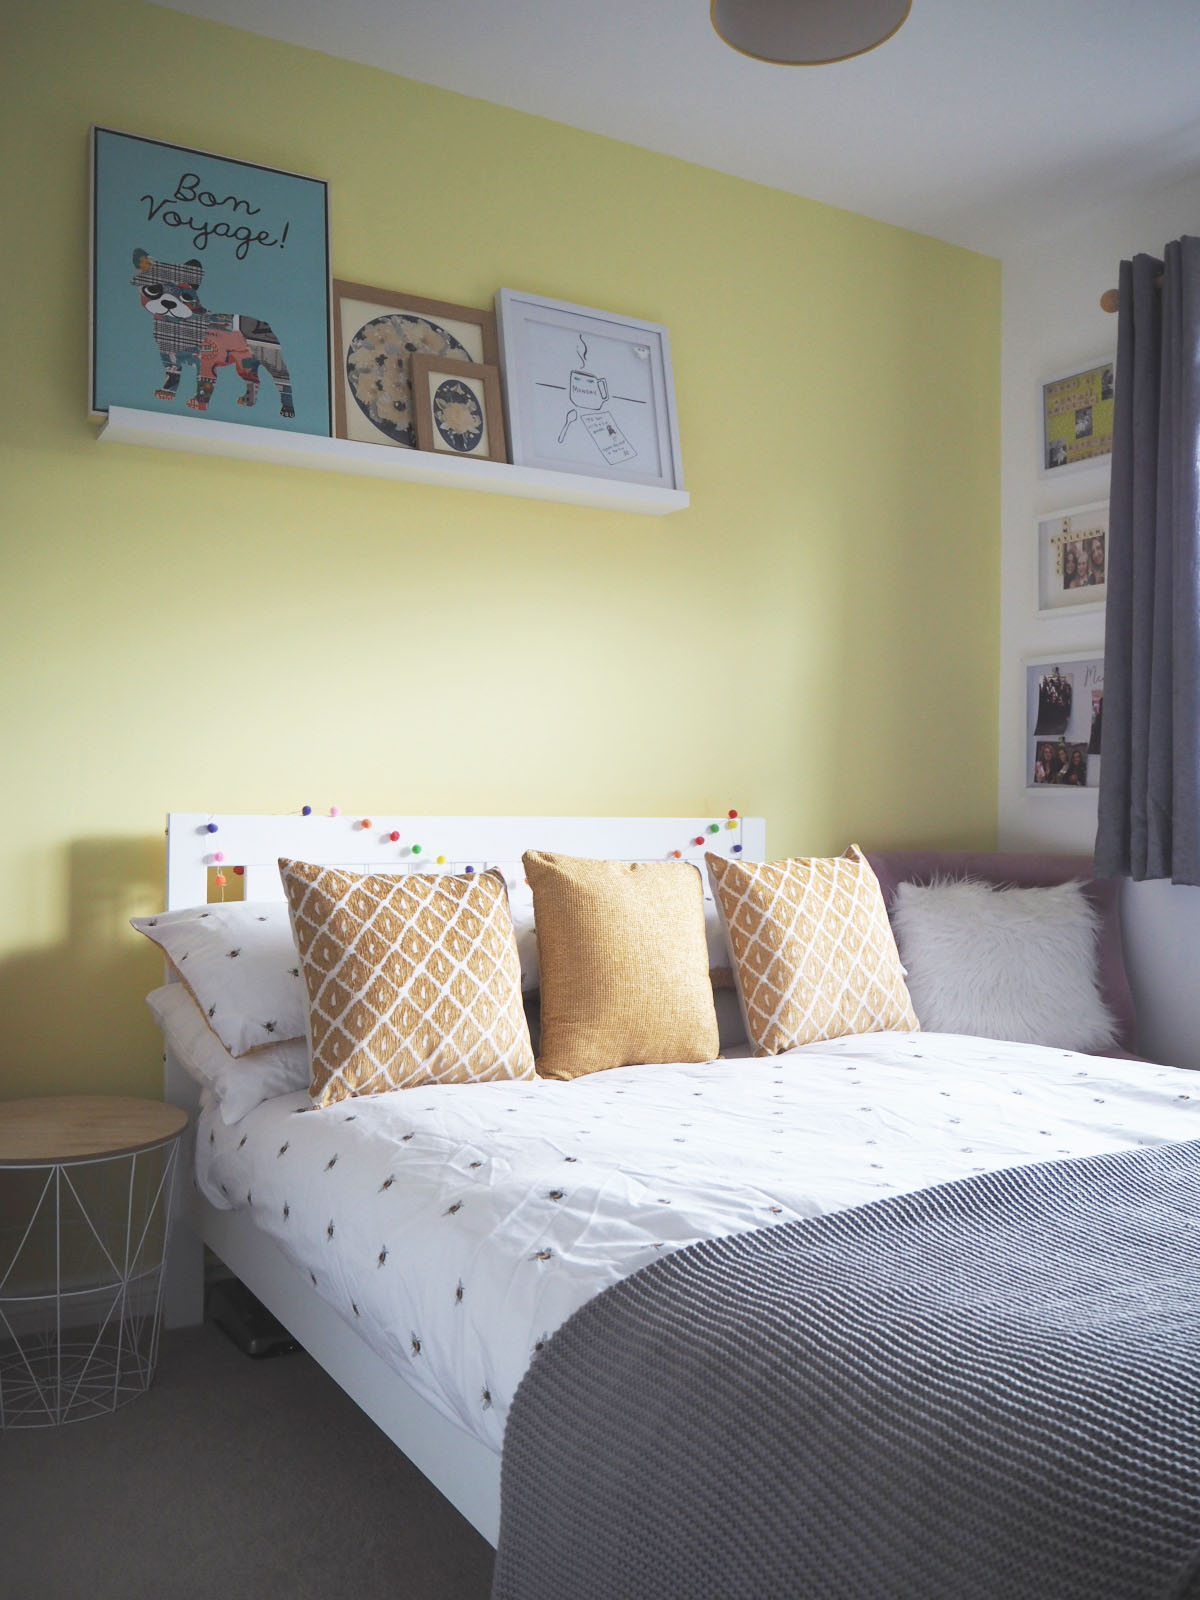 yellow themed bedding with grey, white and yellow bee-themed bedding